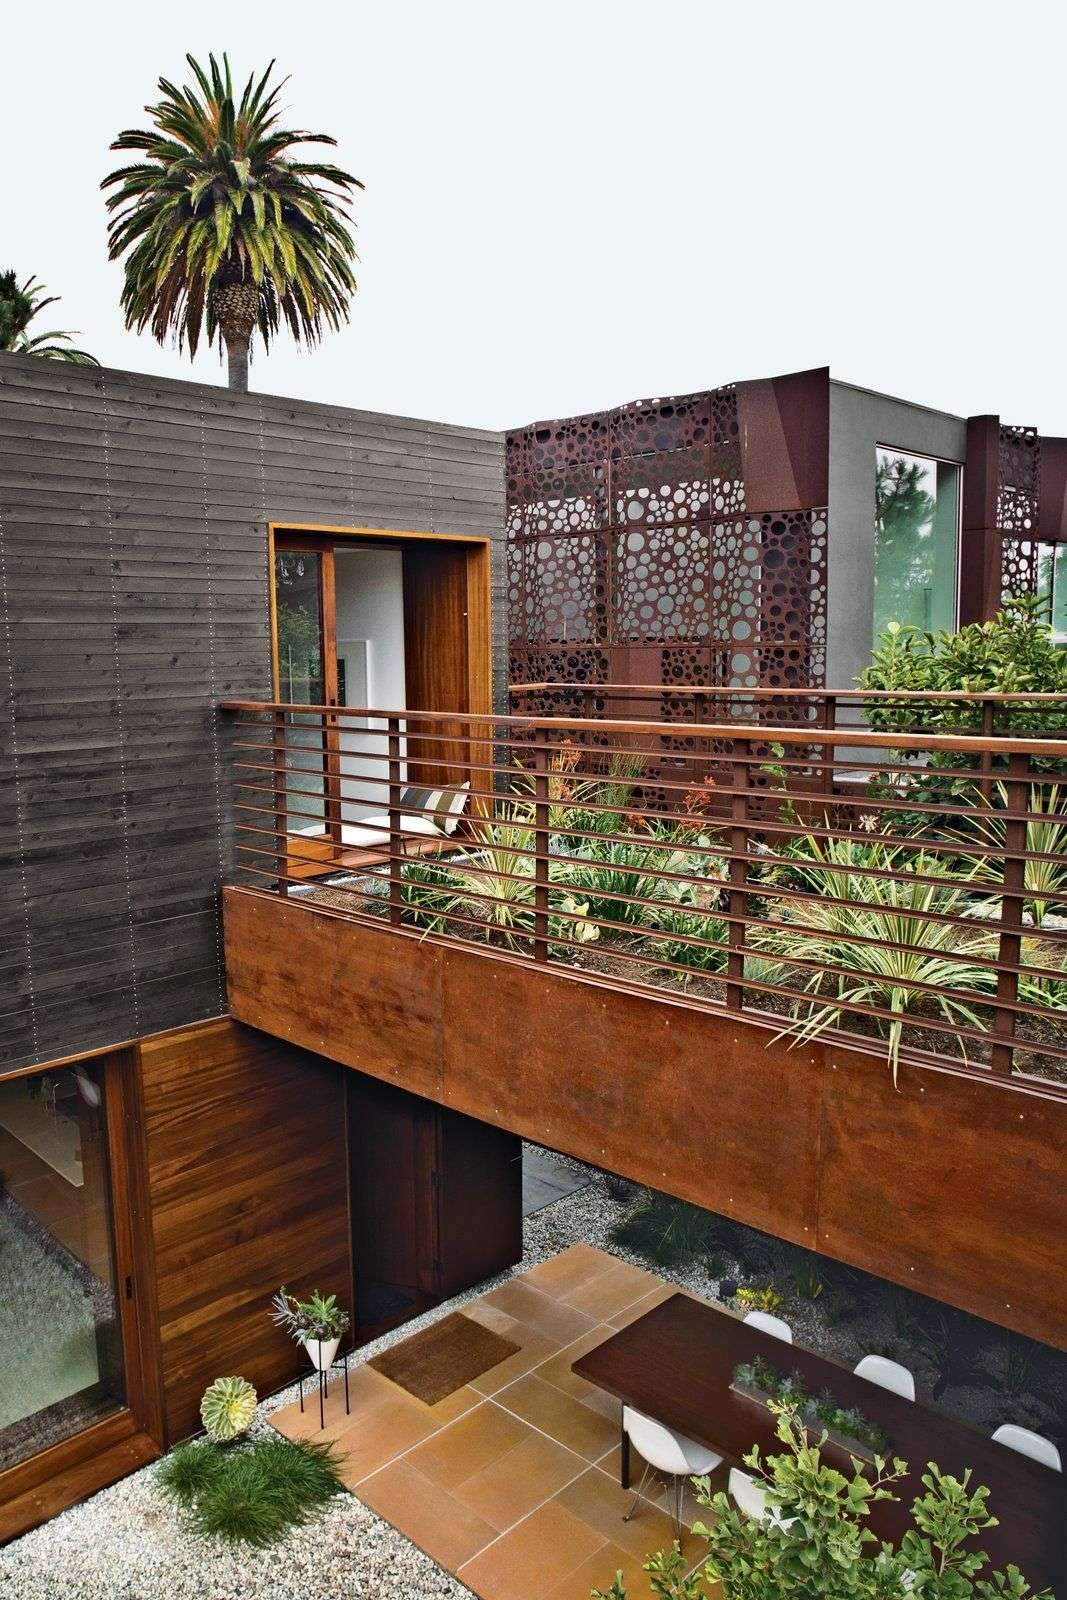 The house rises to nearly the height of the neighboring structure. The plantings on…